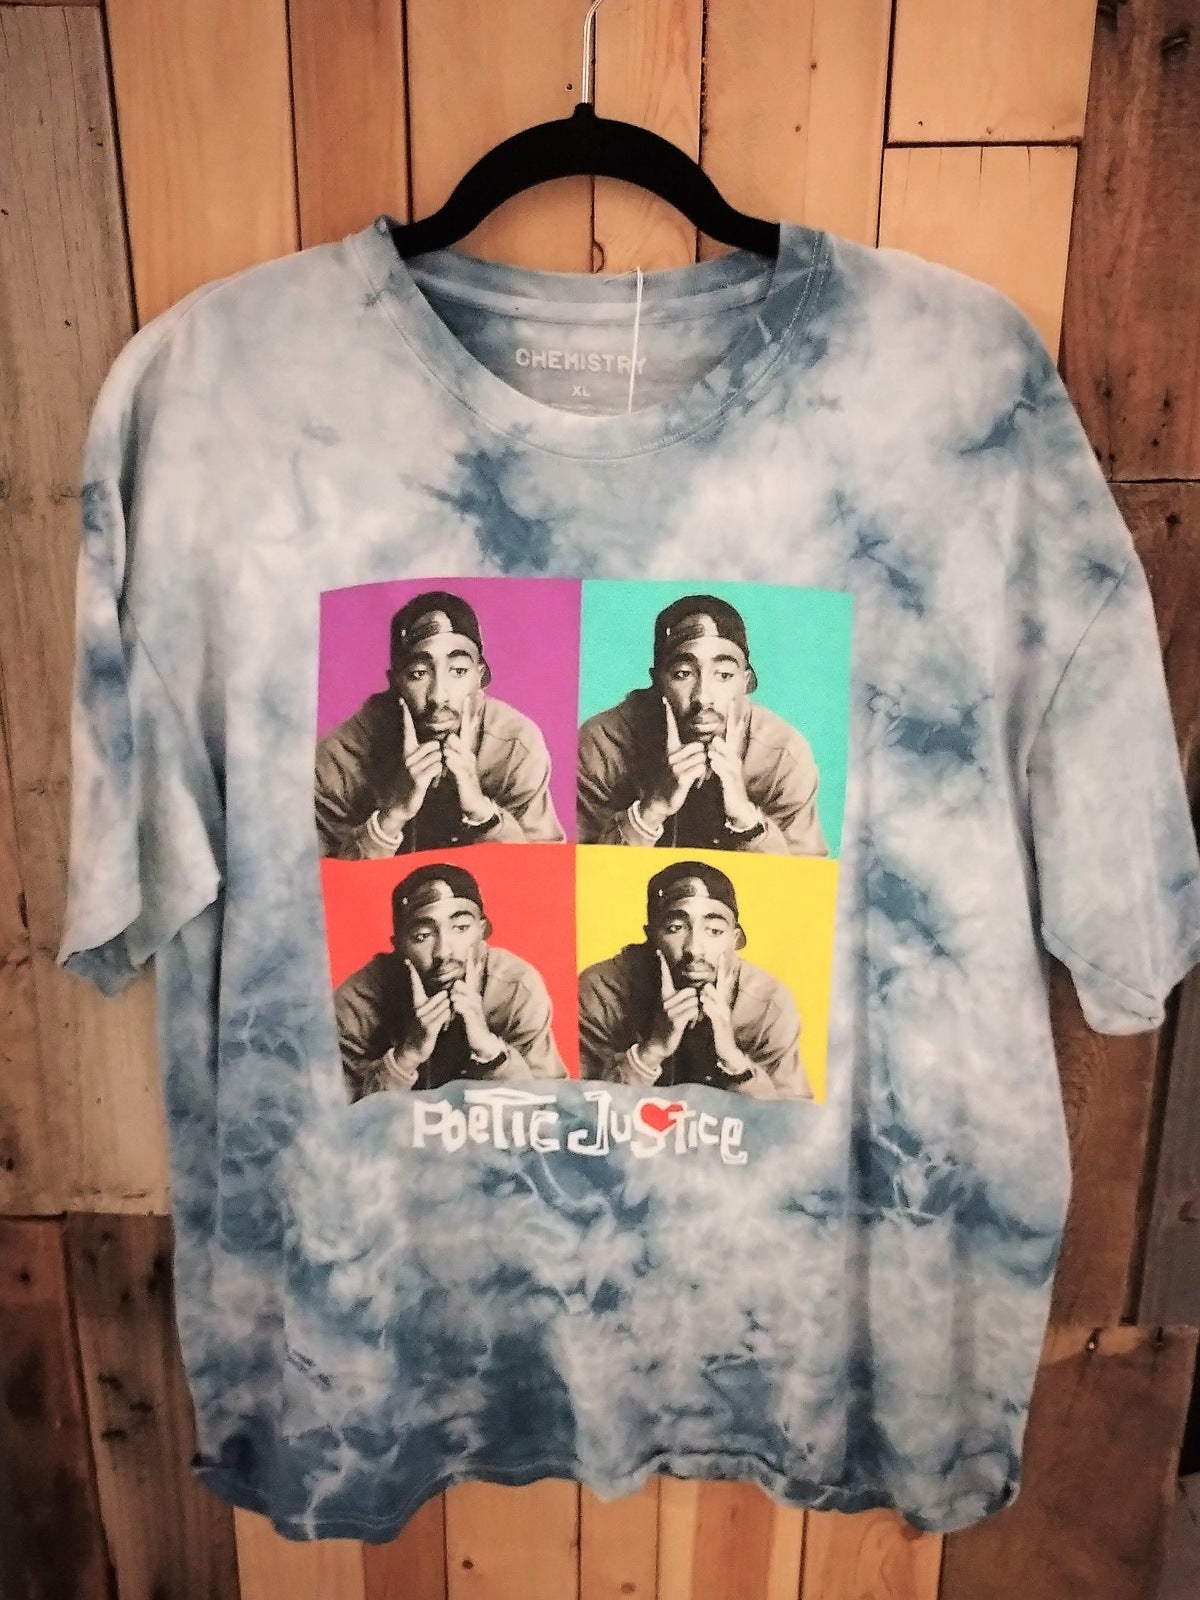 Tupac "Poetic Justice" Official Merchandise T Shirt Size XL